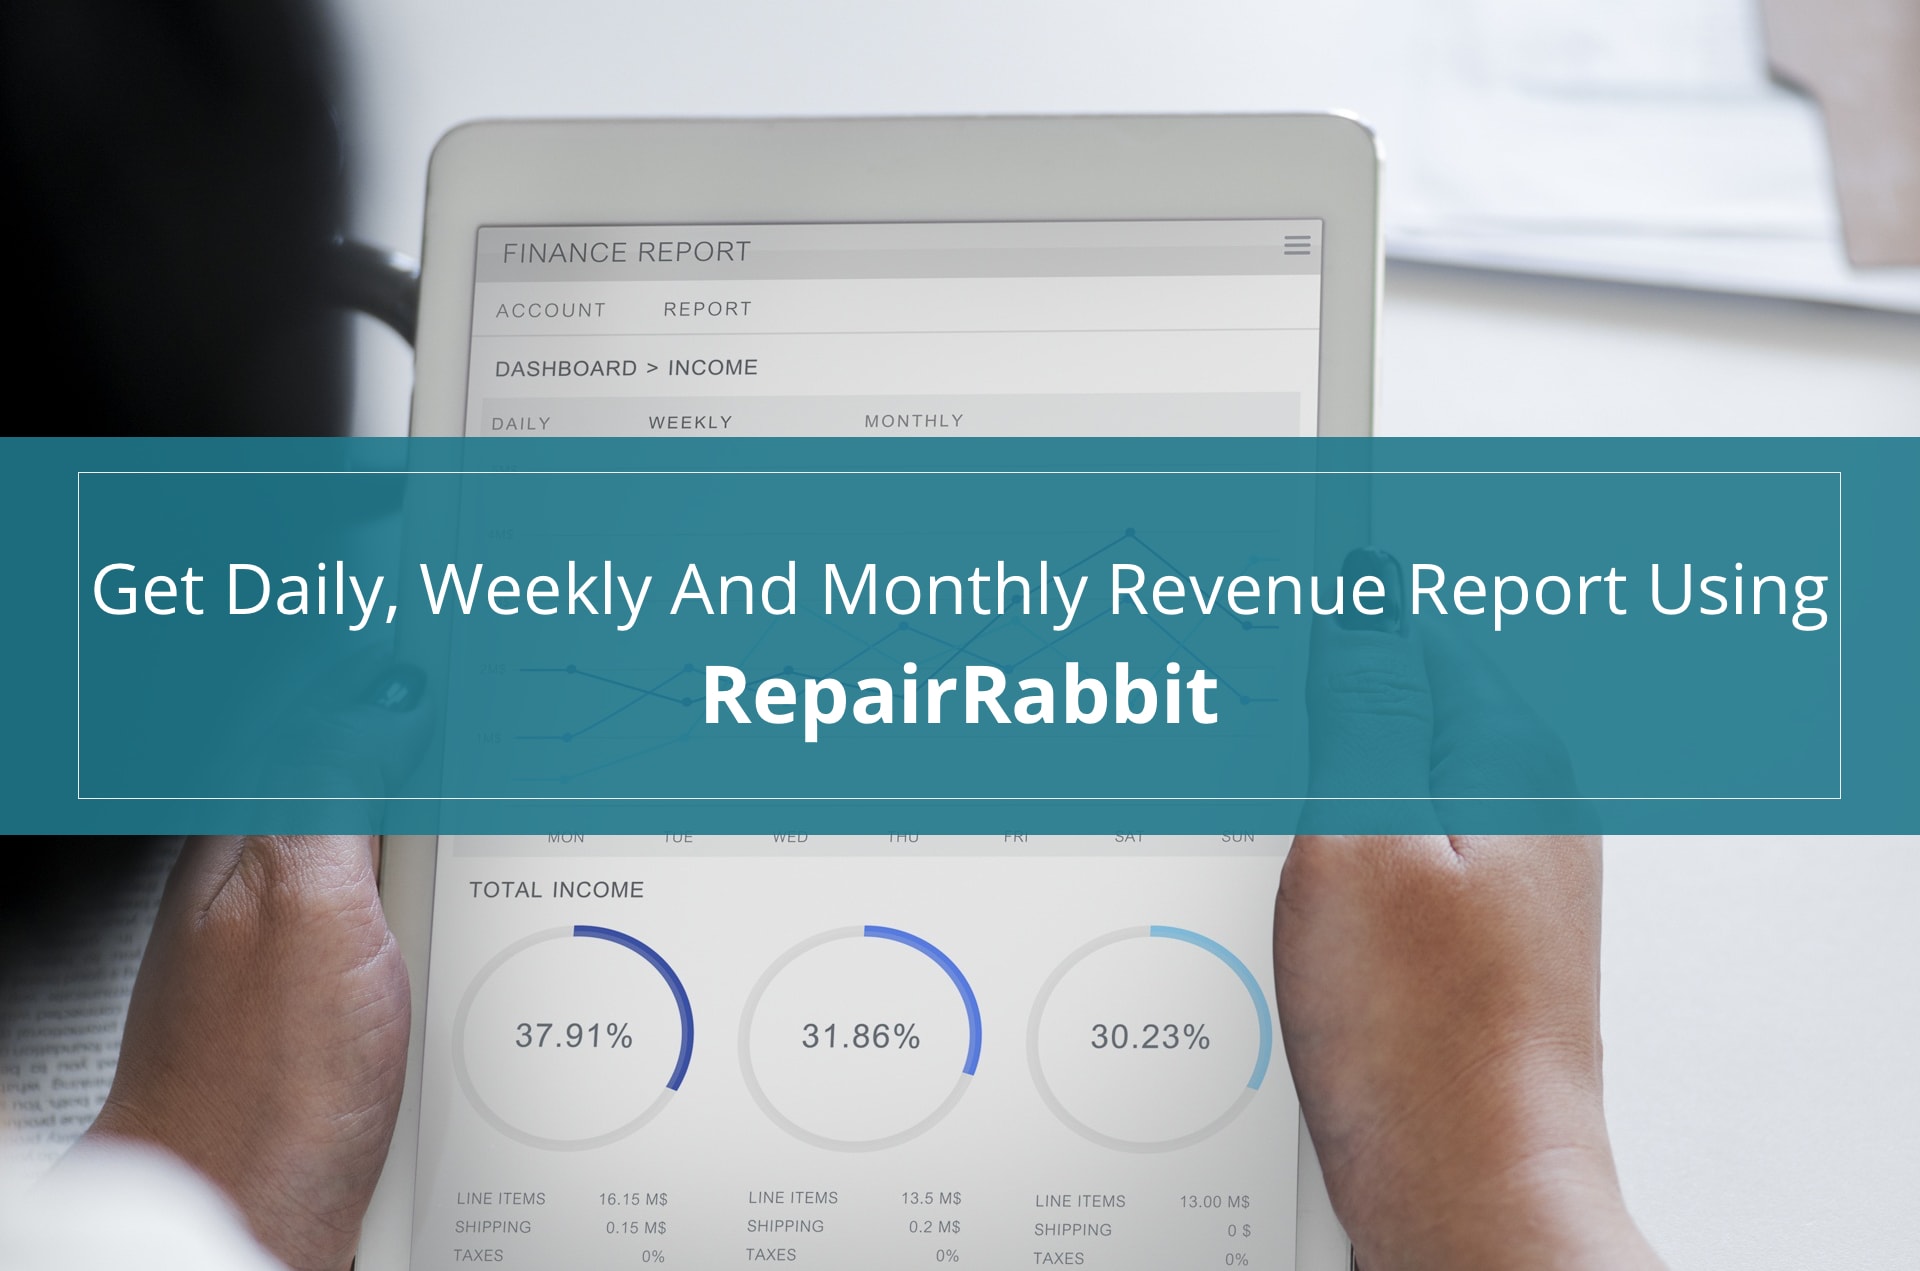 Get Daily weekly and monthly revenue report using RepiarRabbit